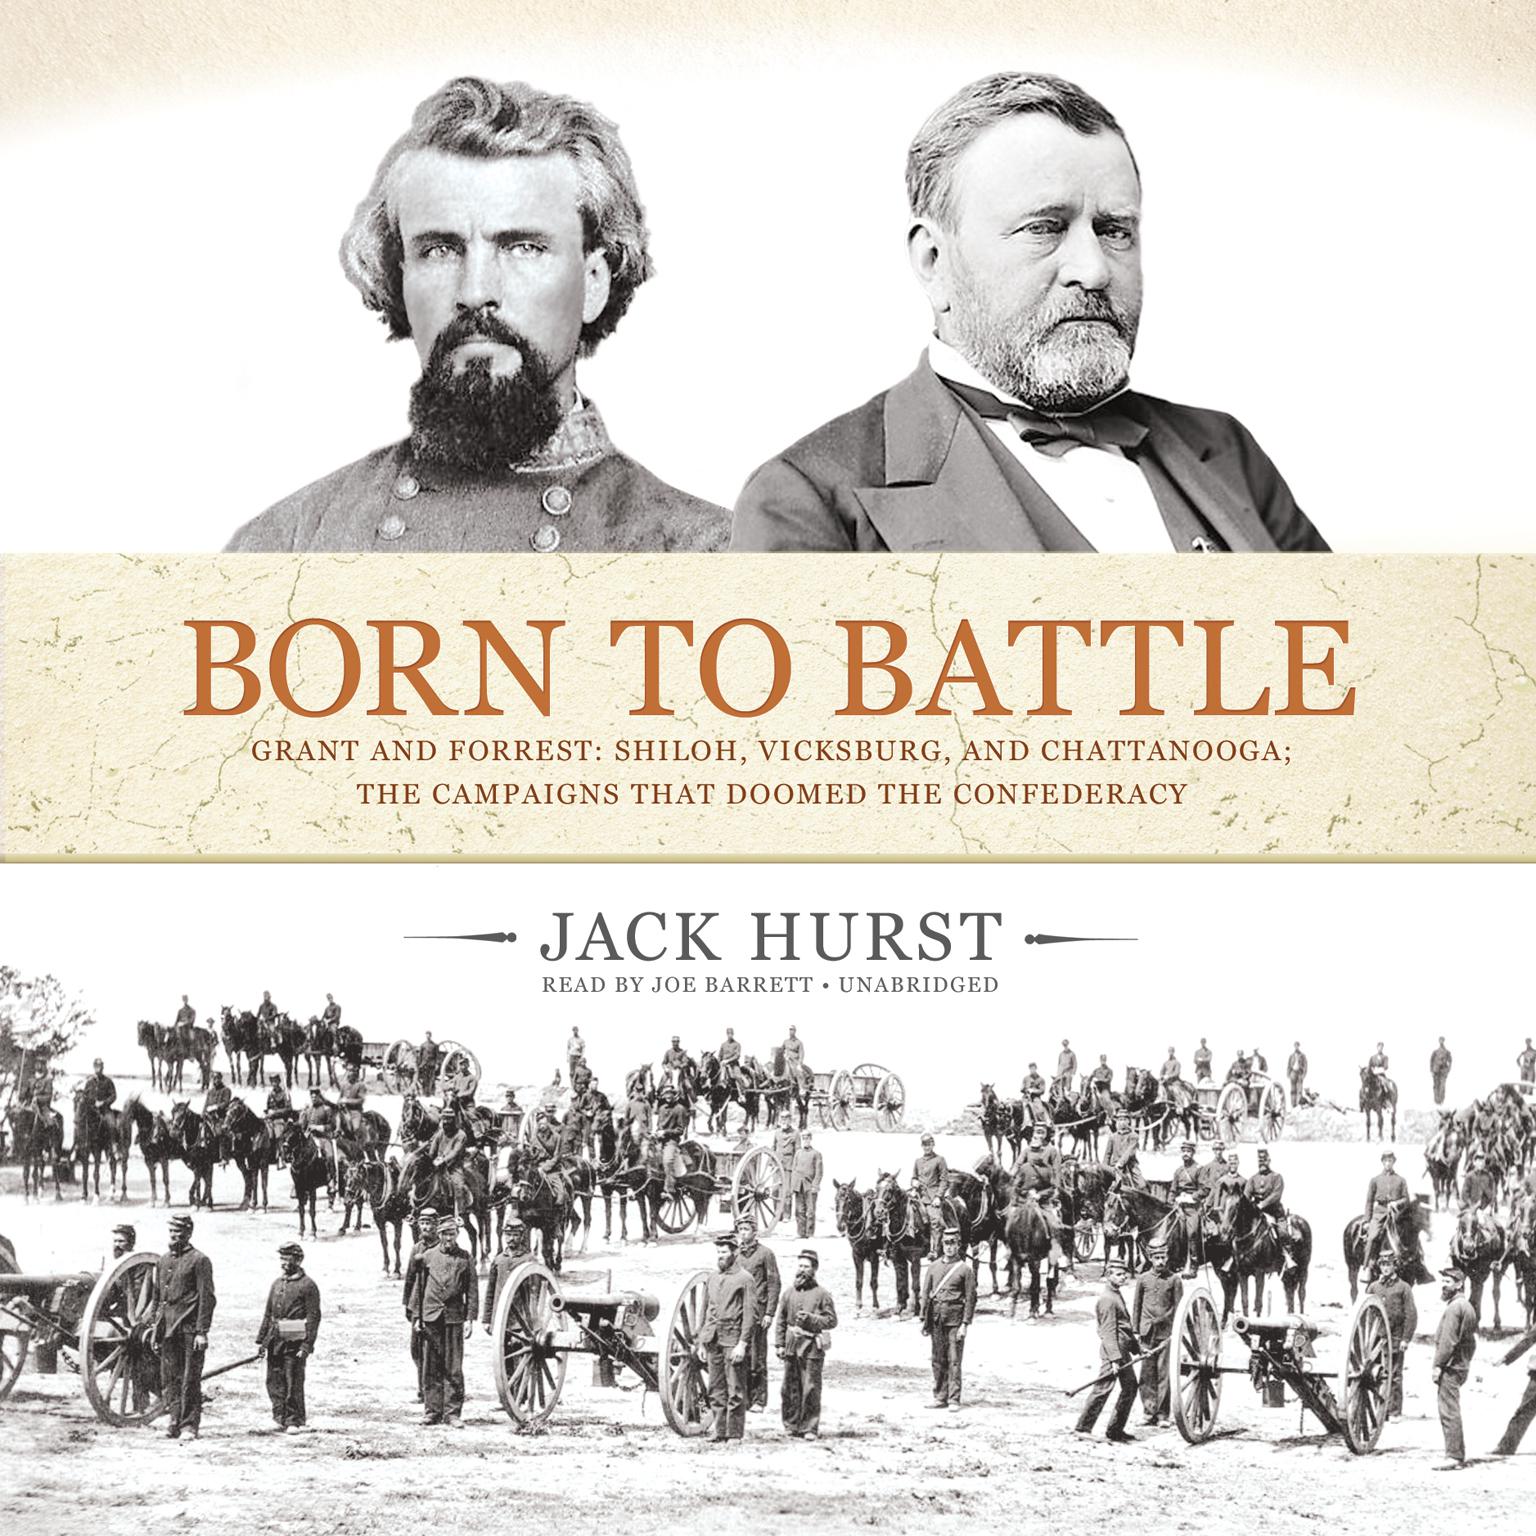 Born to Battle: Grant and Forrest: Shiloh, Vicksburg, and Chattanooga; the Campaigns That Doomed the Confederacy Audiobook, by Jack Hurst